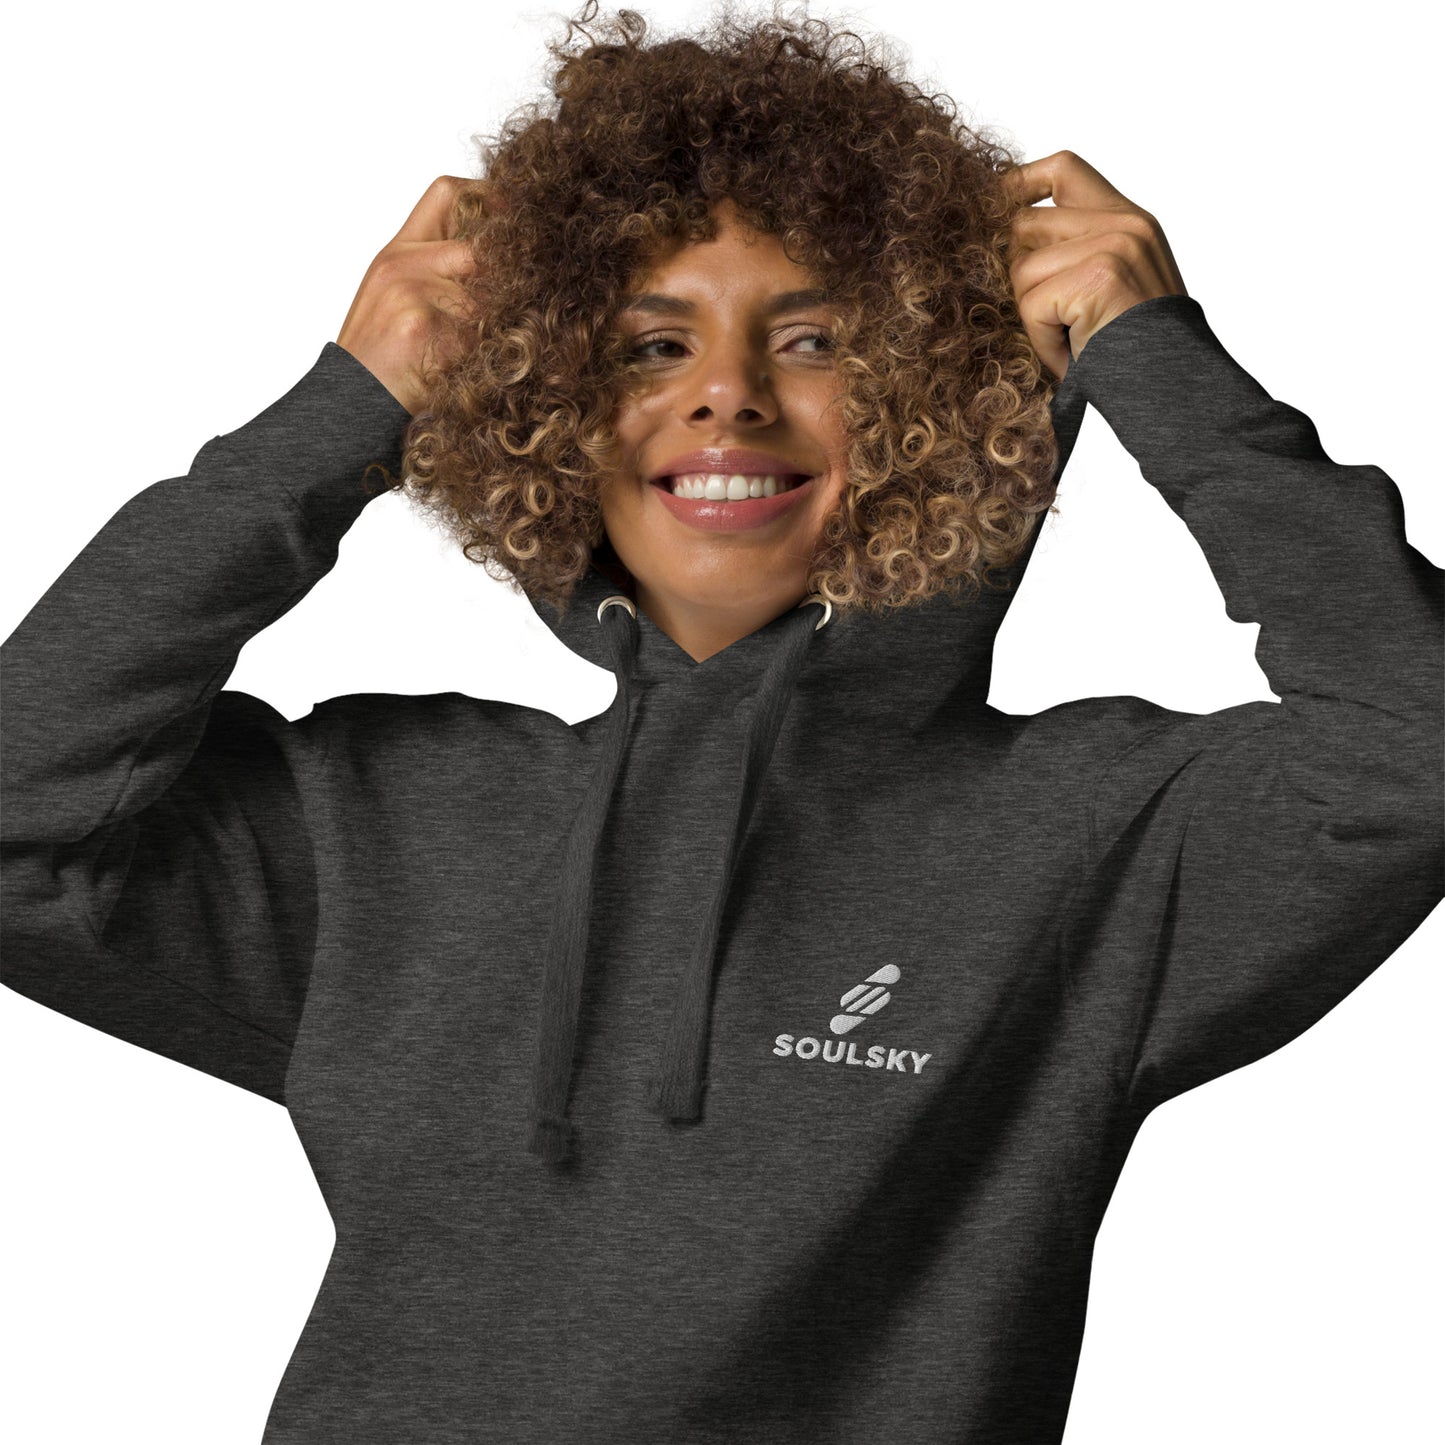 Embroidered Logo Popover Hoodie - Charcoal Heather